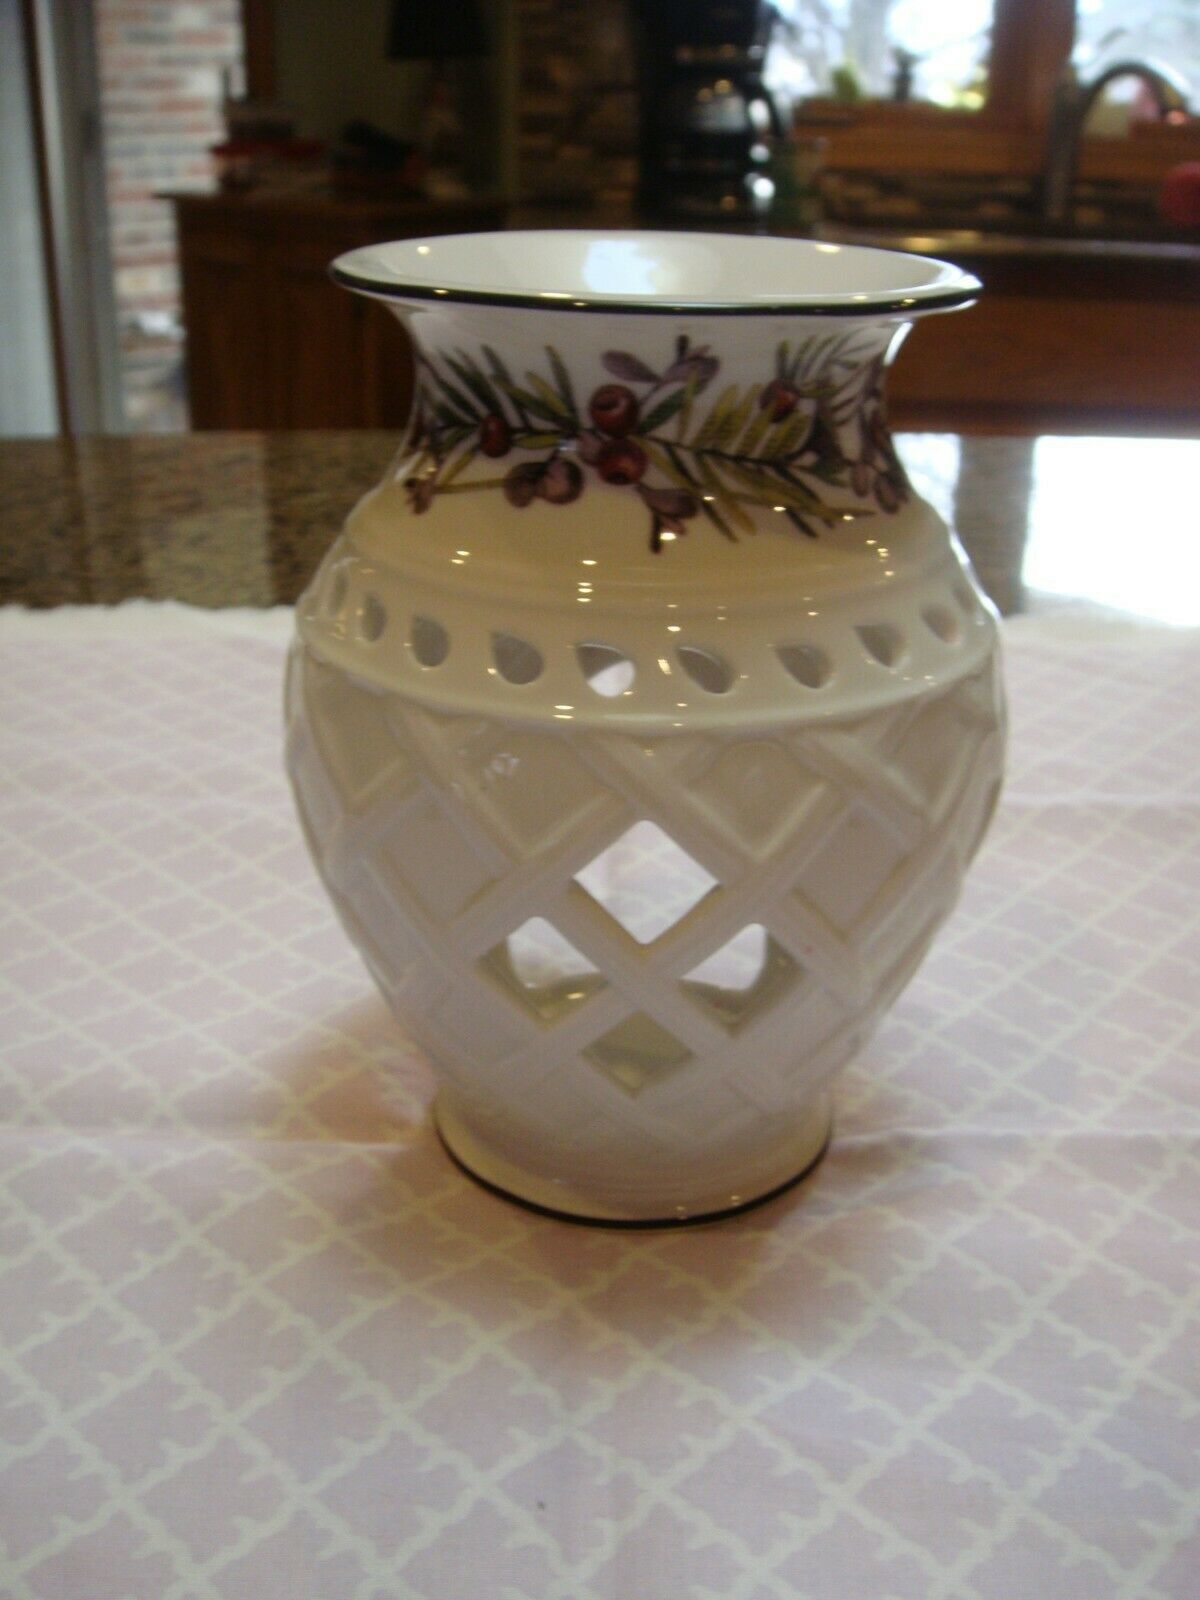 Lenox Etchings Collections Tart Warmer - $21.99